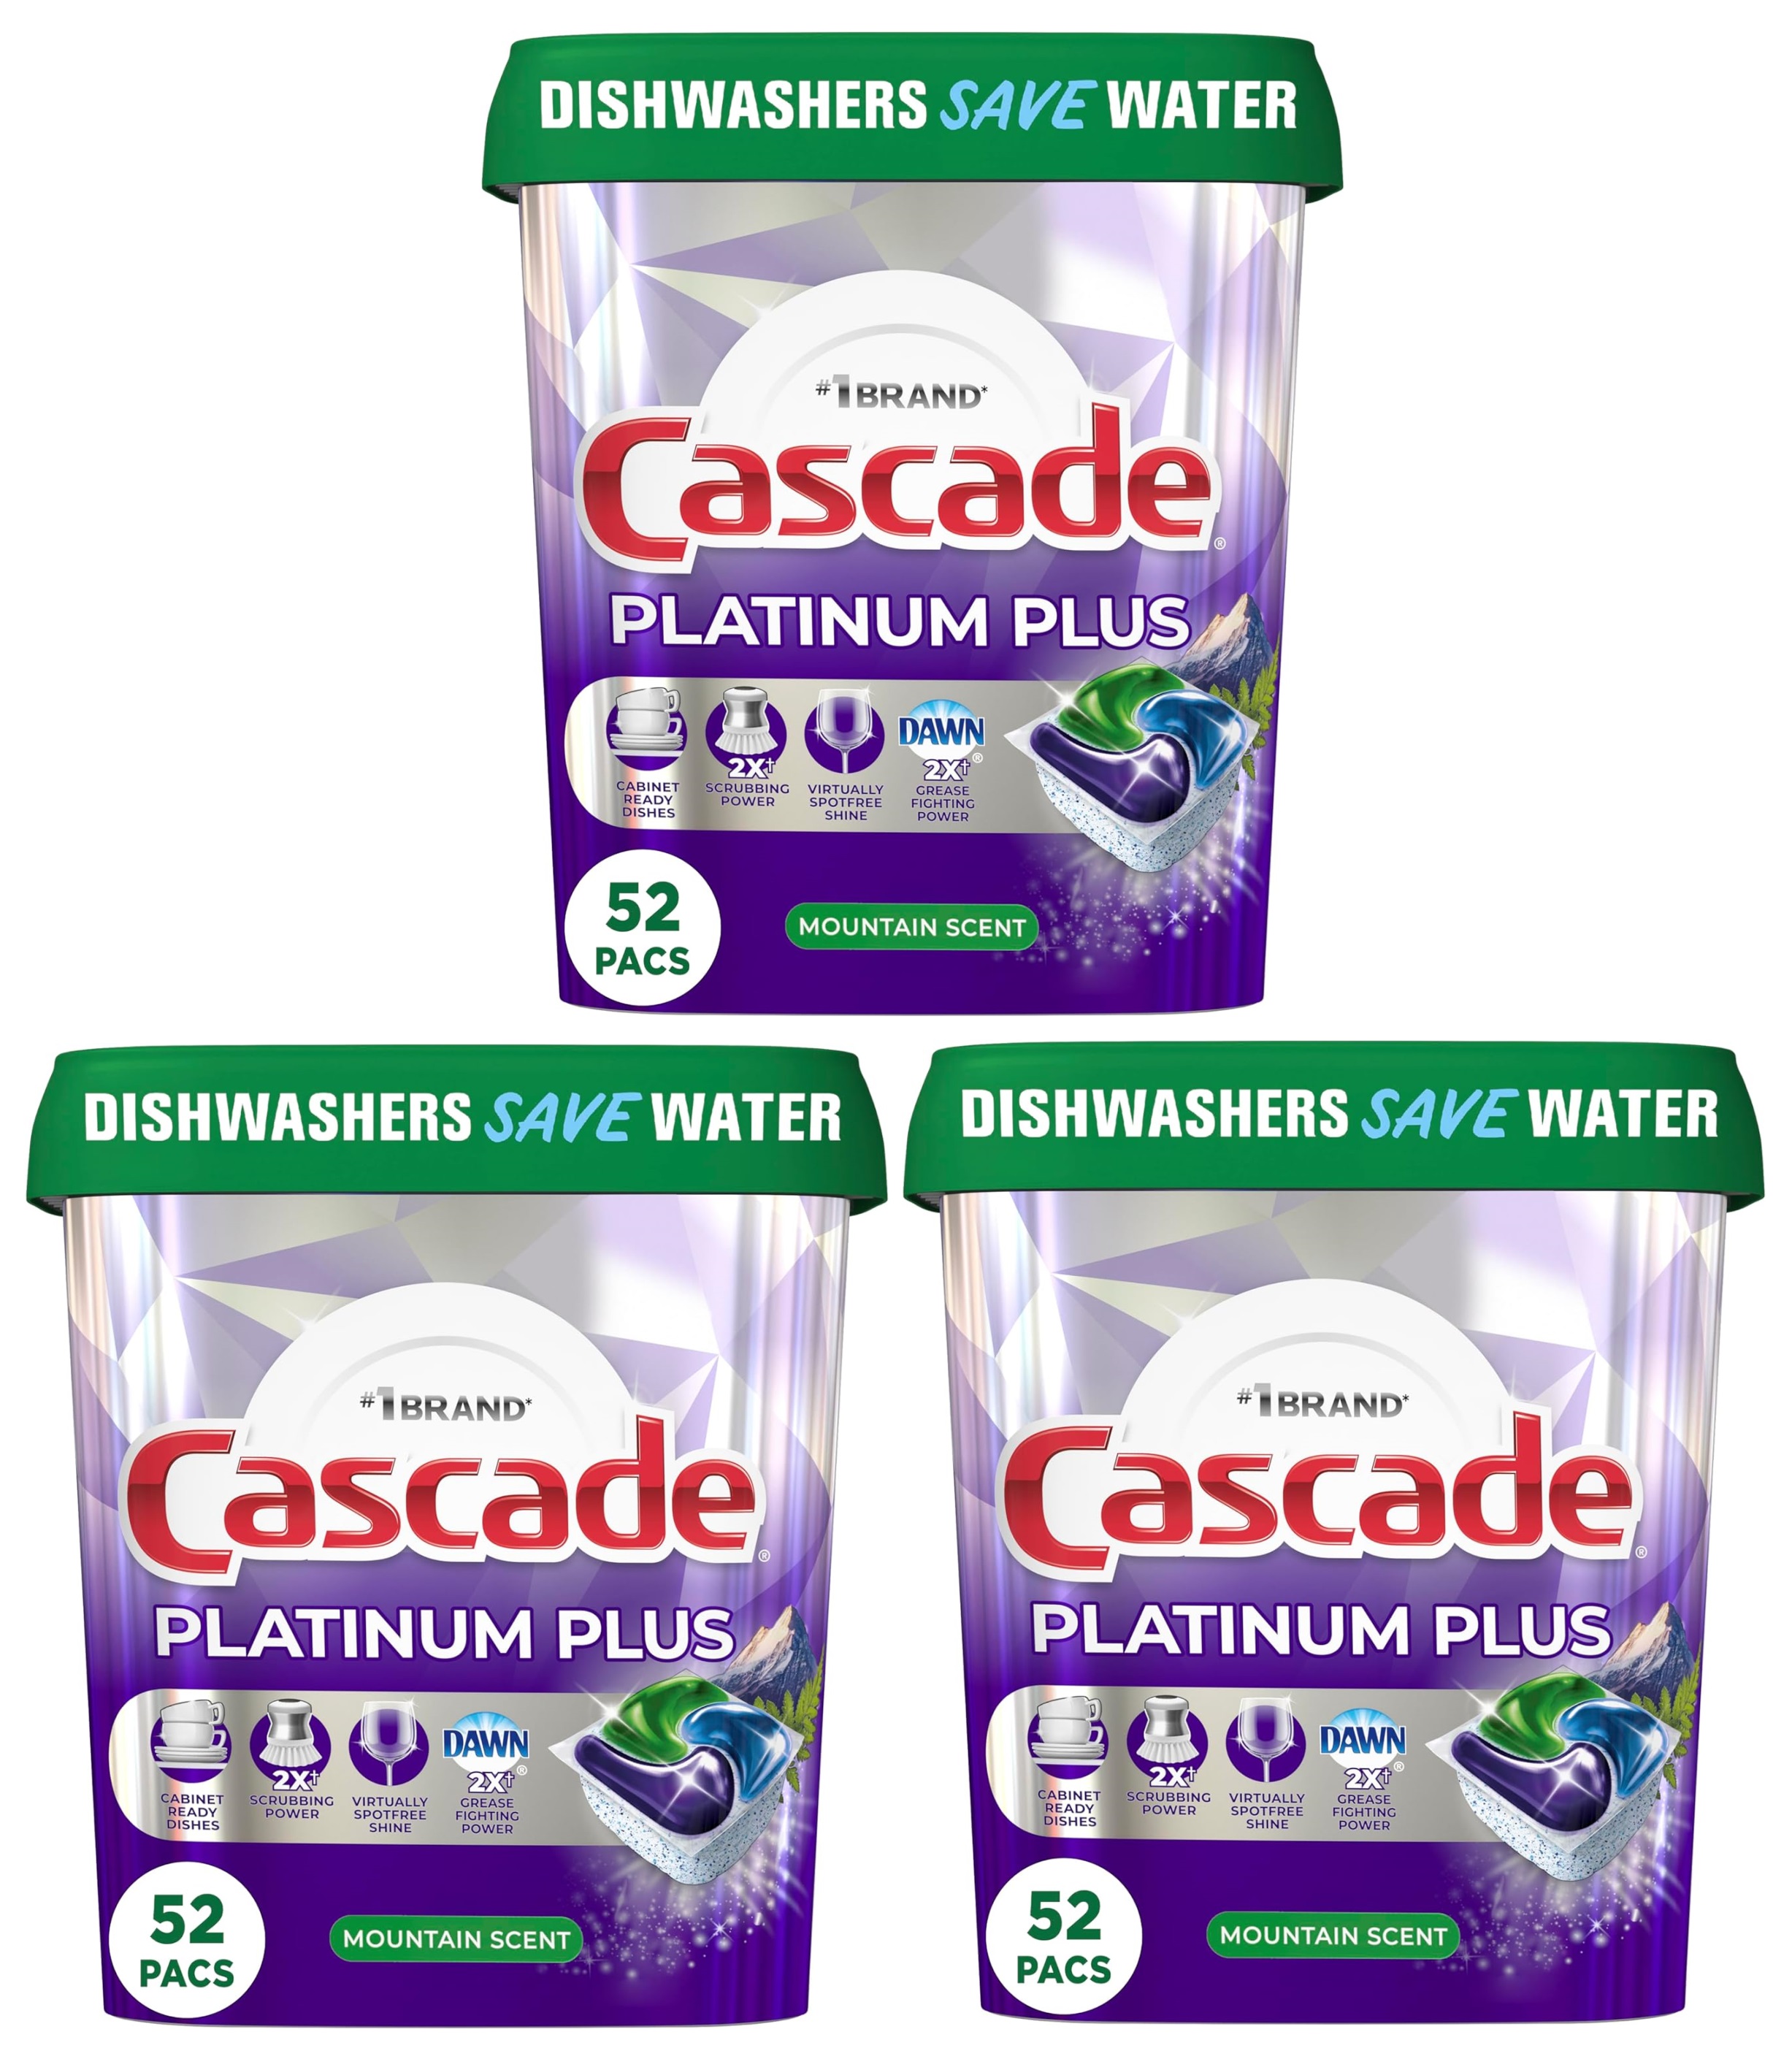 52-Count Cascade Platinum Plus ActionPacs Dishwasher Pods Mountain Scent $10 Amazon Credit 3 for $41.85 More after $15 R